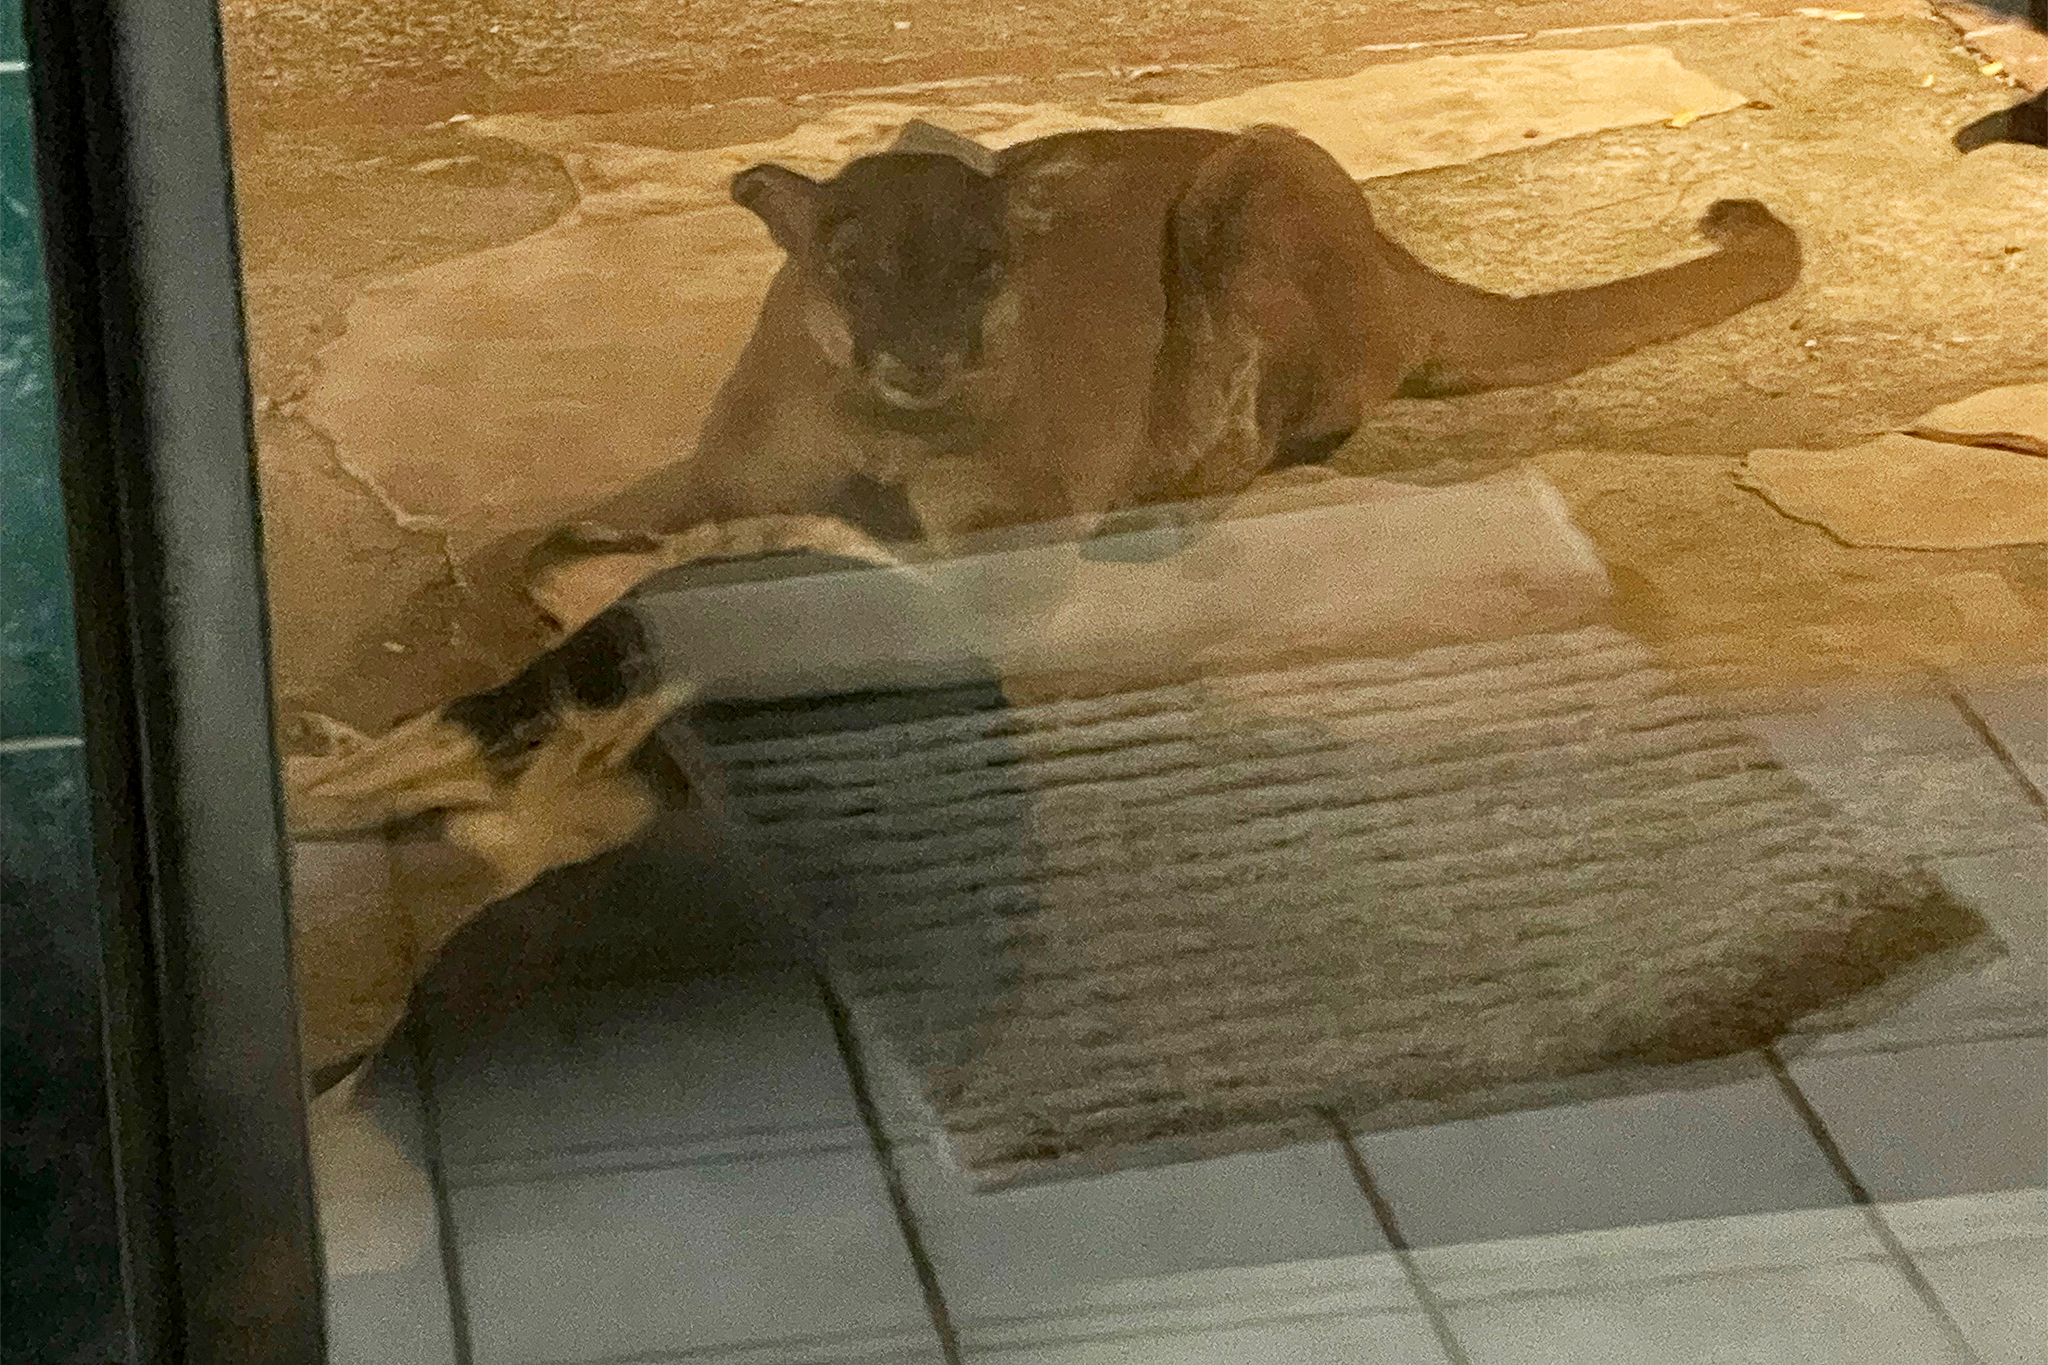 Shock': Mountain lion enters Bay Area home, drags dog outside